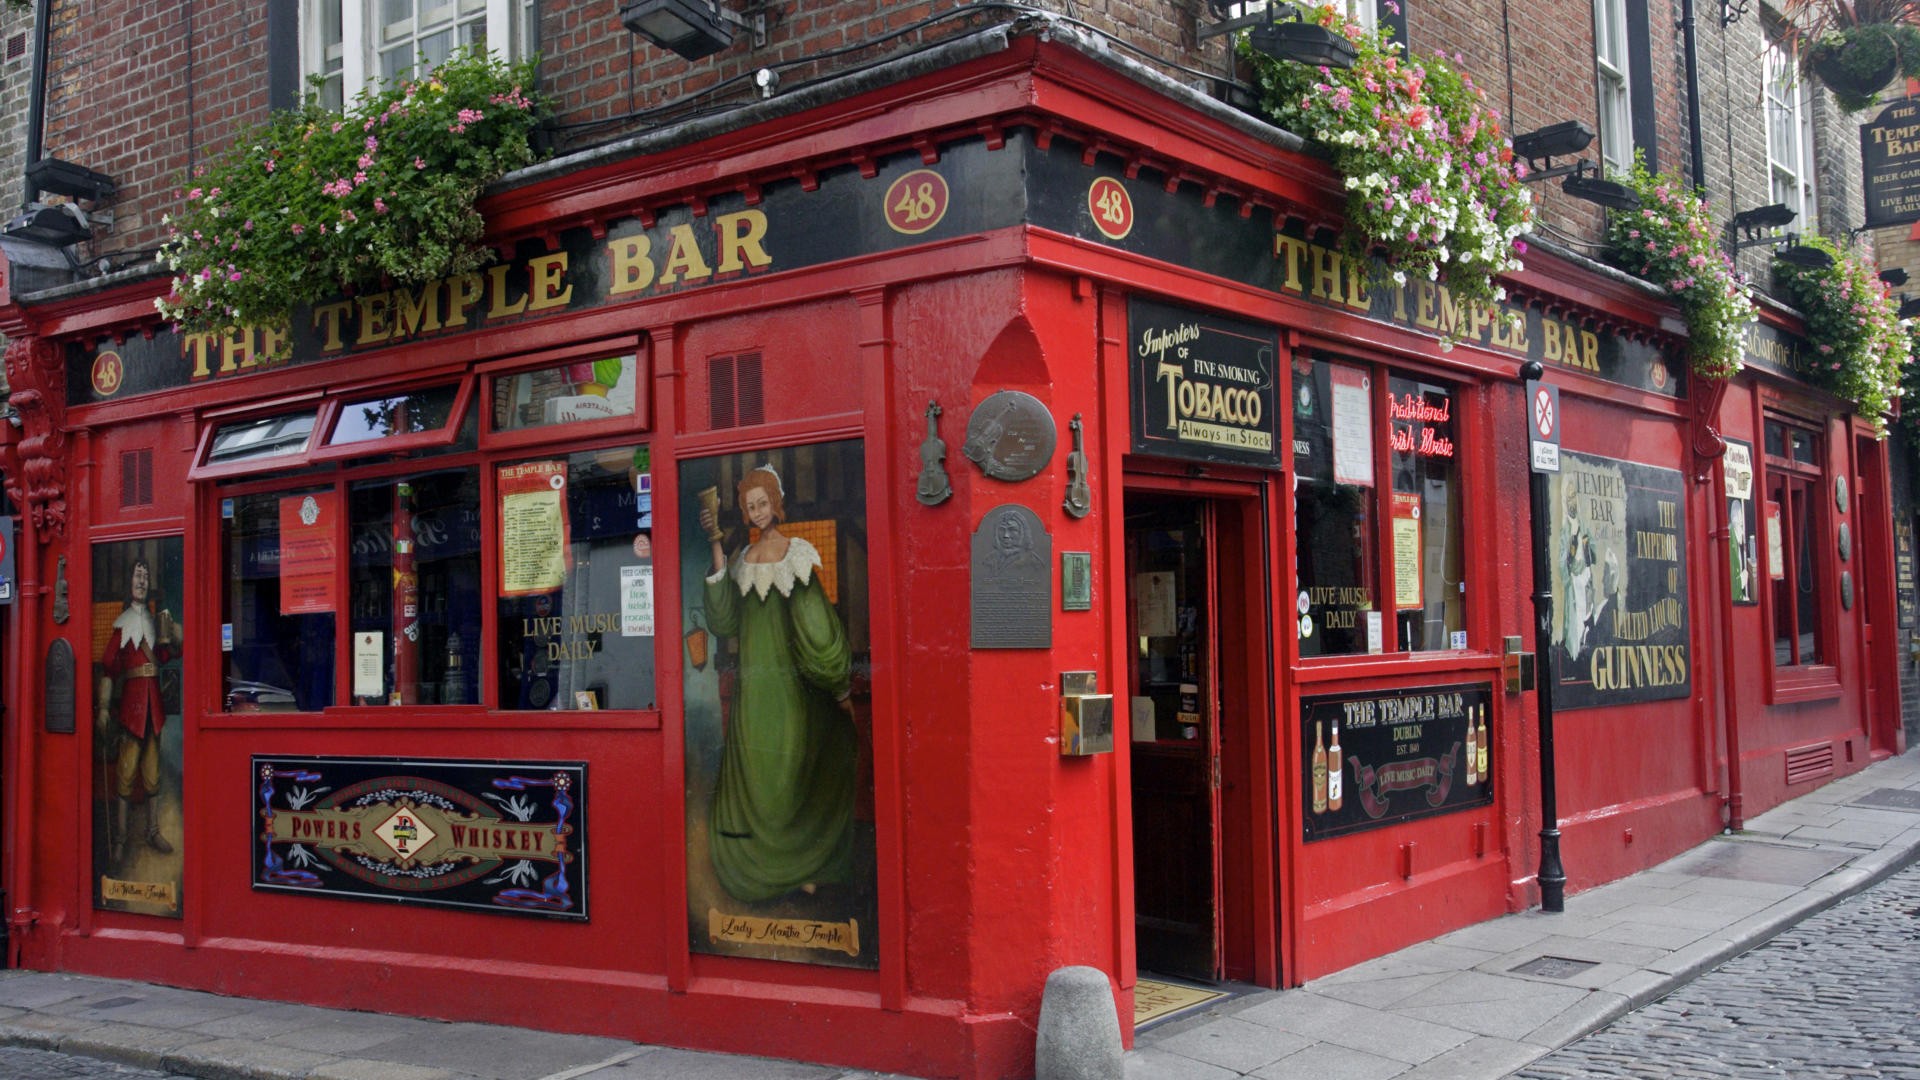 ireland, man made, building, dublin, pub, temple bar wallpapers for tablet